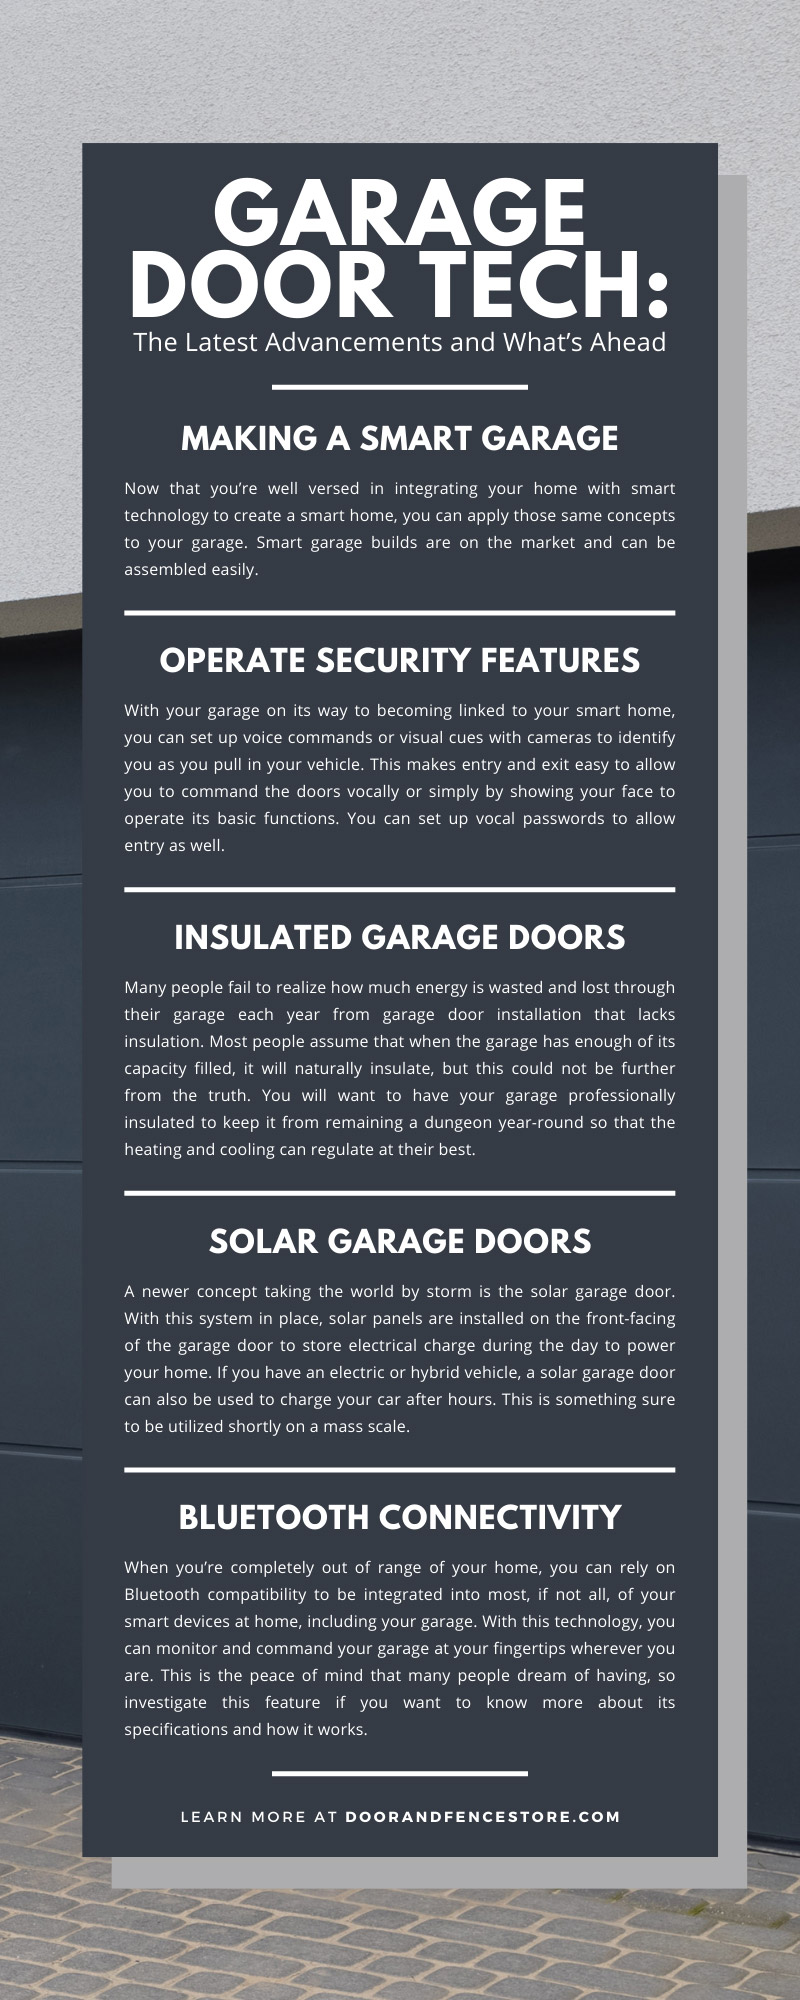 Garage Door Tech: The Latest Advancements and What’s Ahead